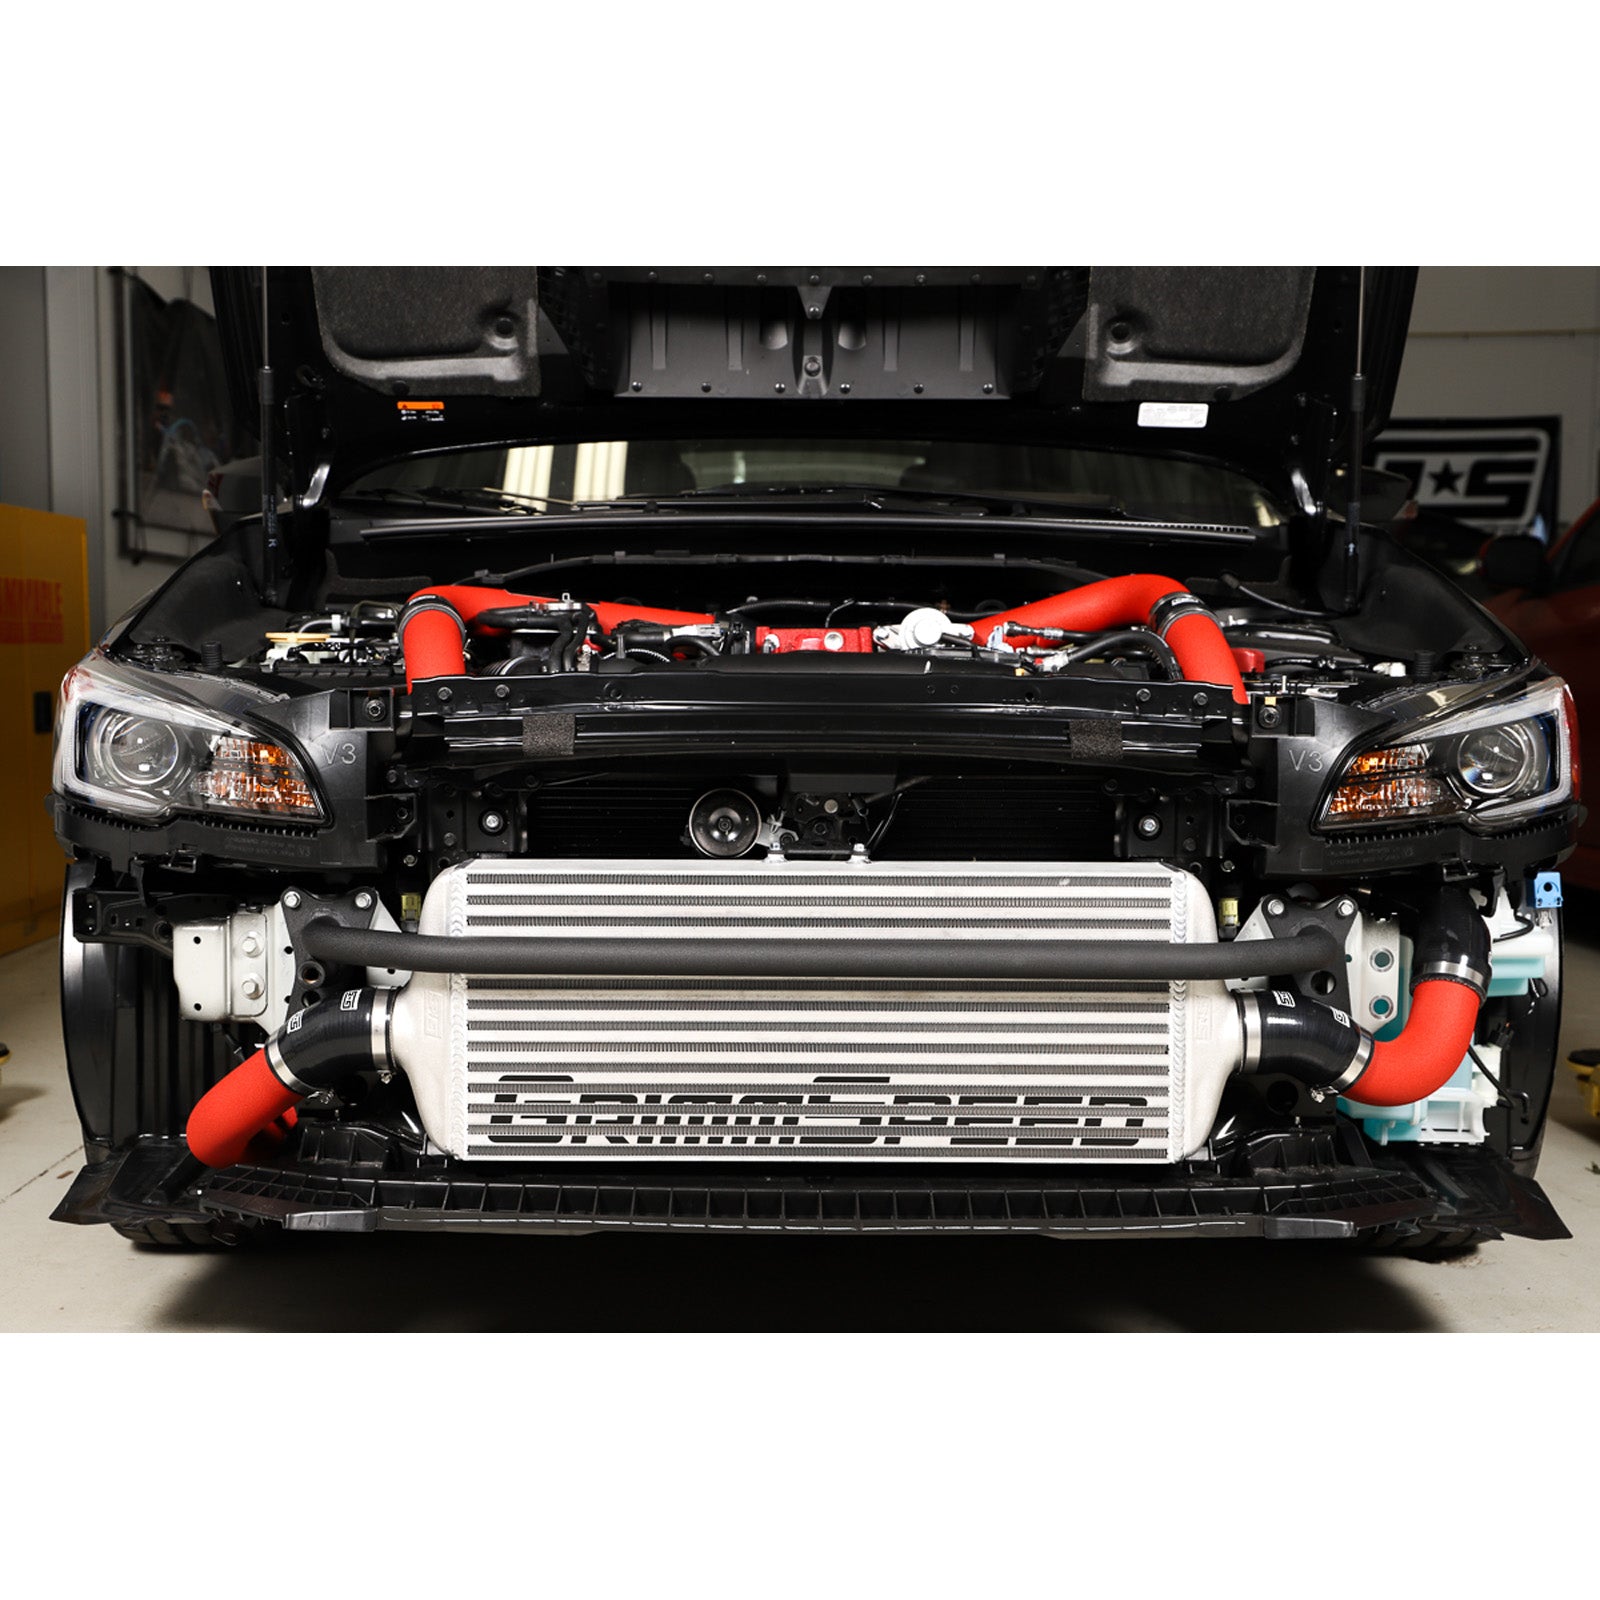 GrimmSpeed Front Mount Intercooler Kit - Raw Core with Red Piping - 2015-21 Subaru STI